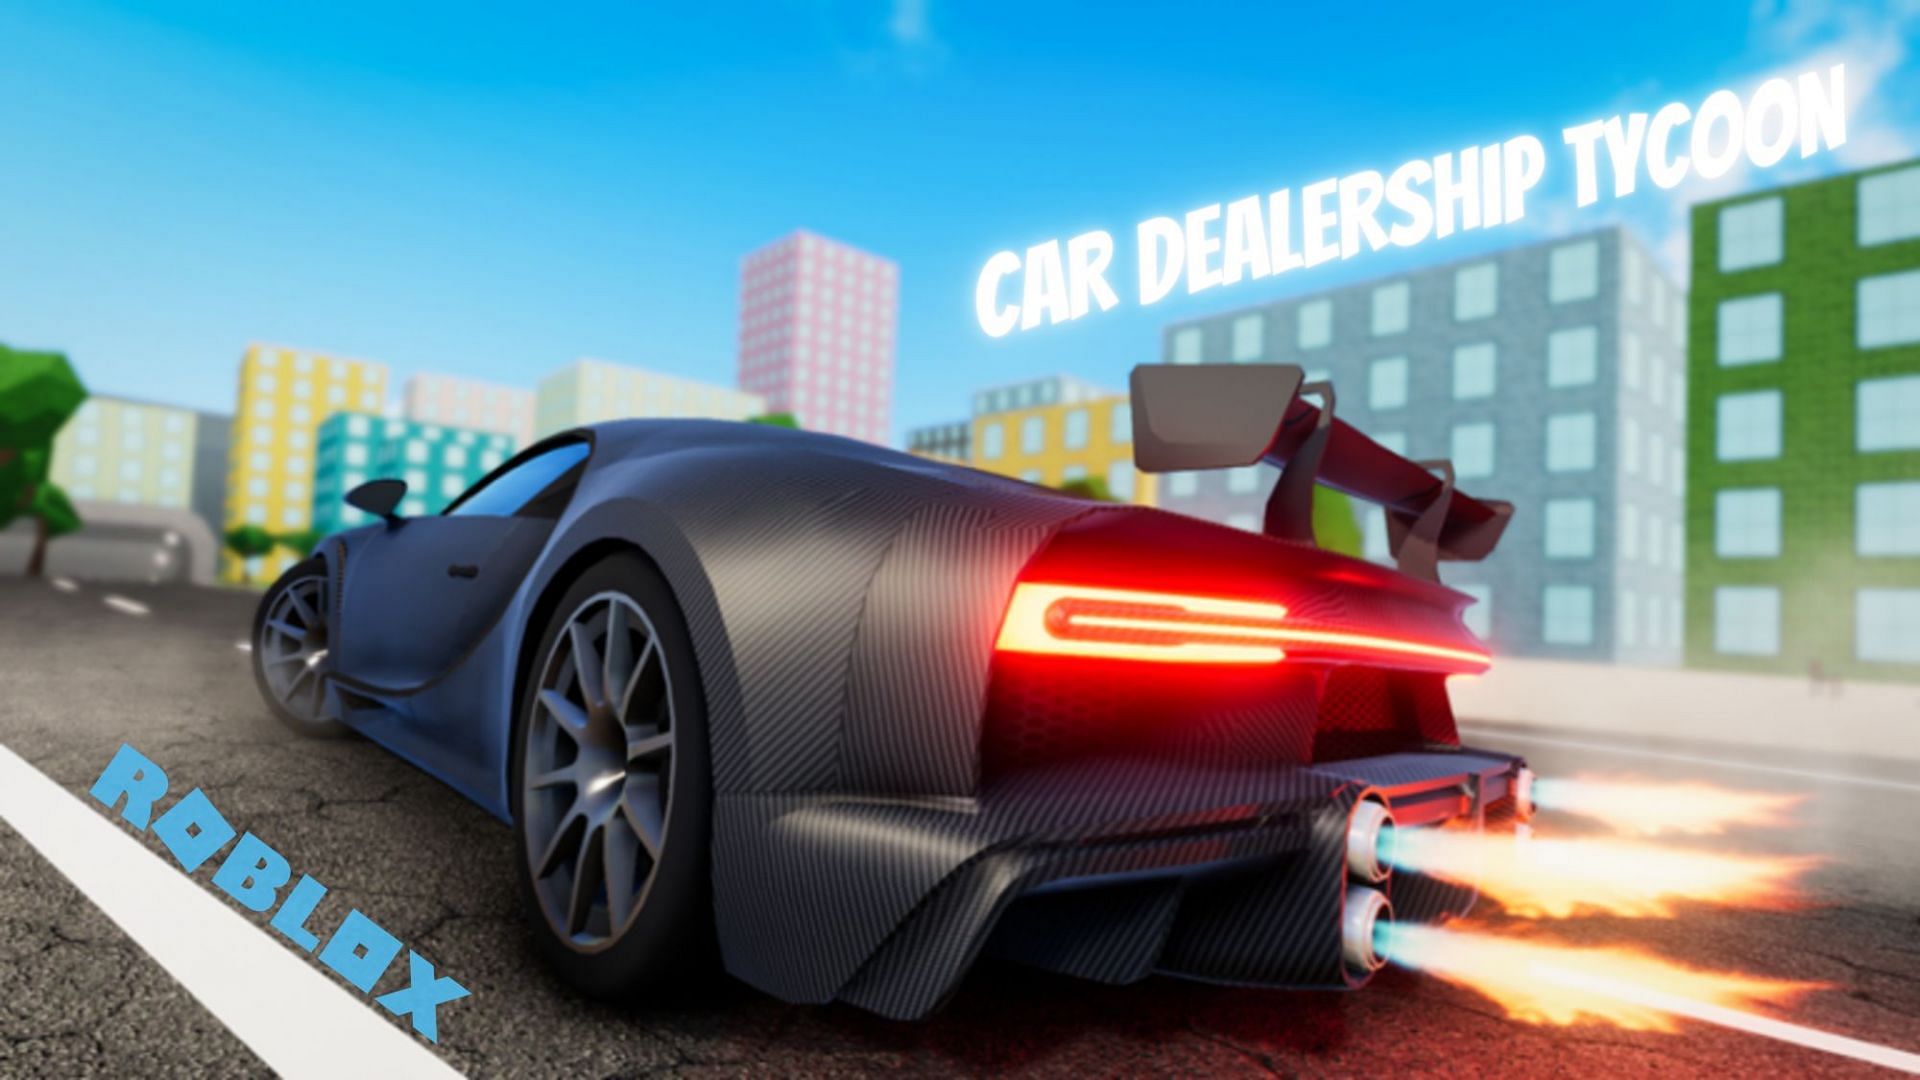 Car dealership tycoon codes in Roblox Free cash (May 2022)